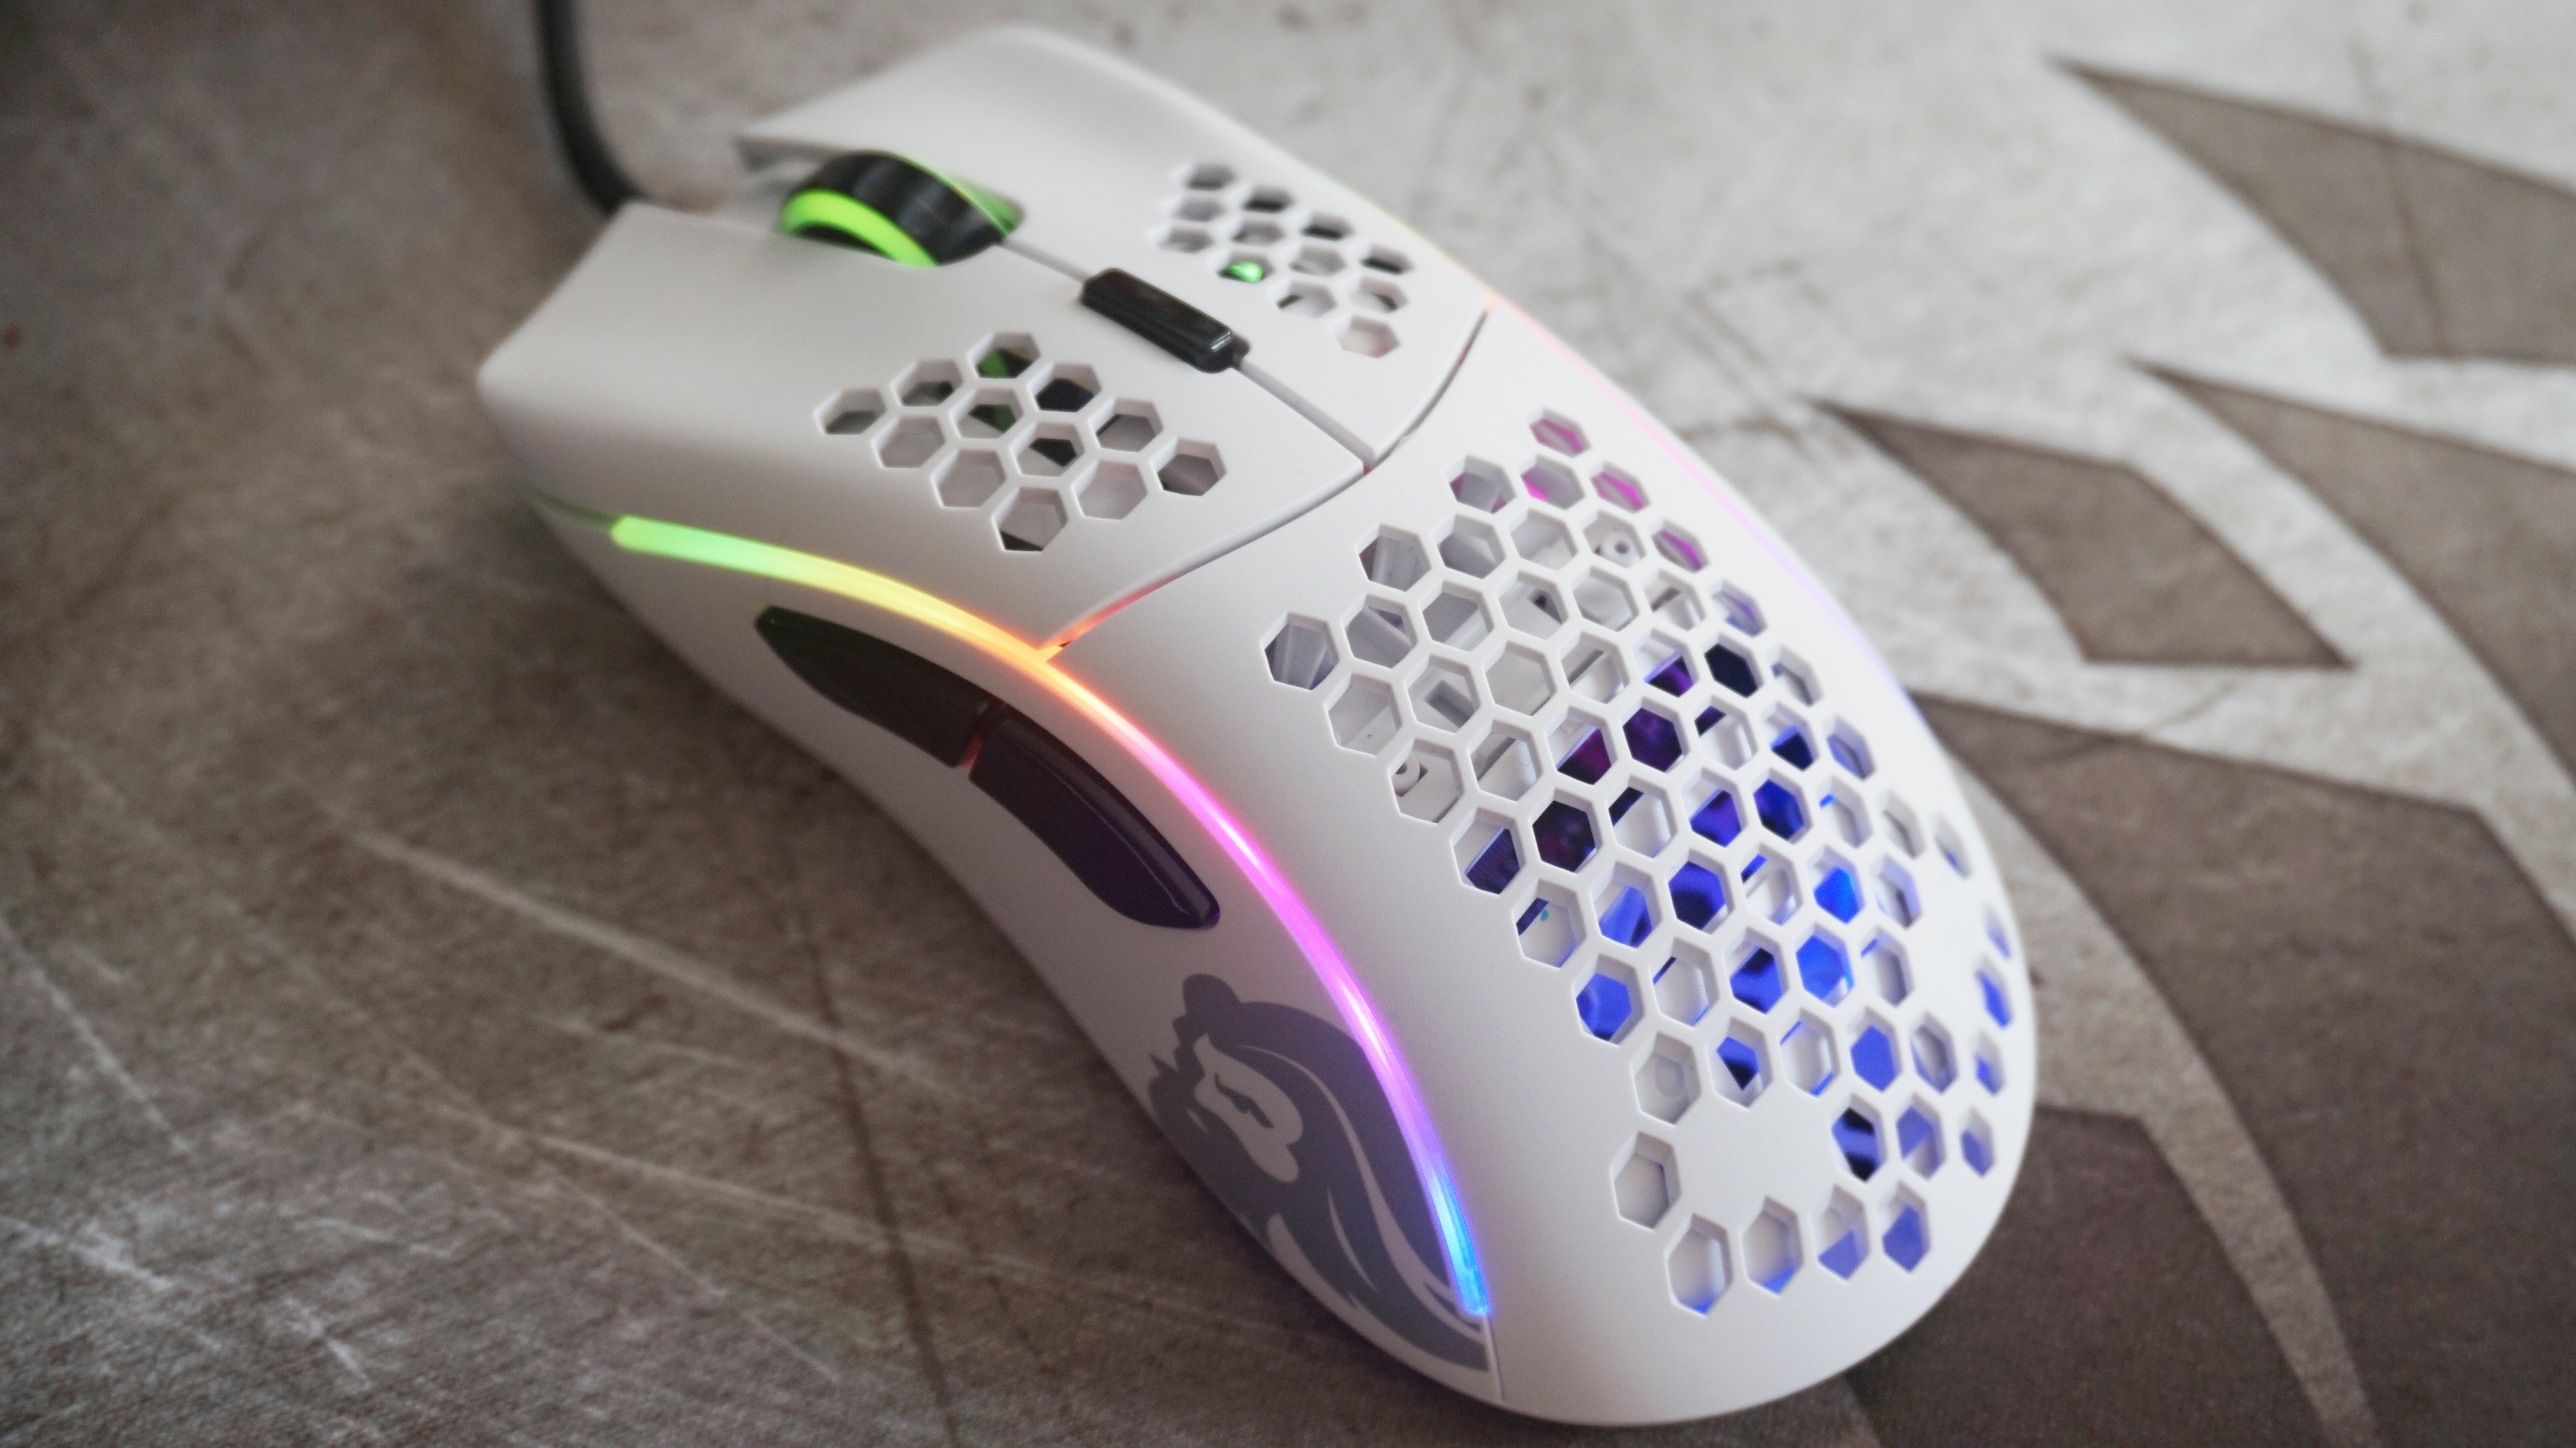 Image for Save 20% on Glorious' Model O gaming mouse plus loads more in their flash sale